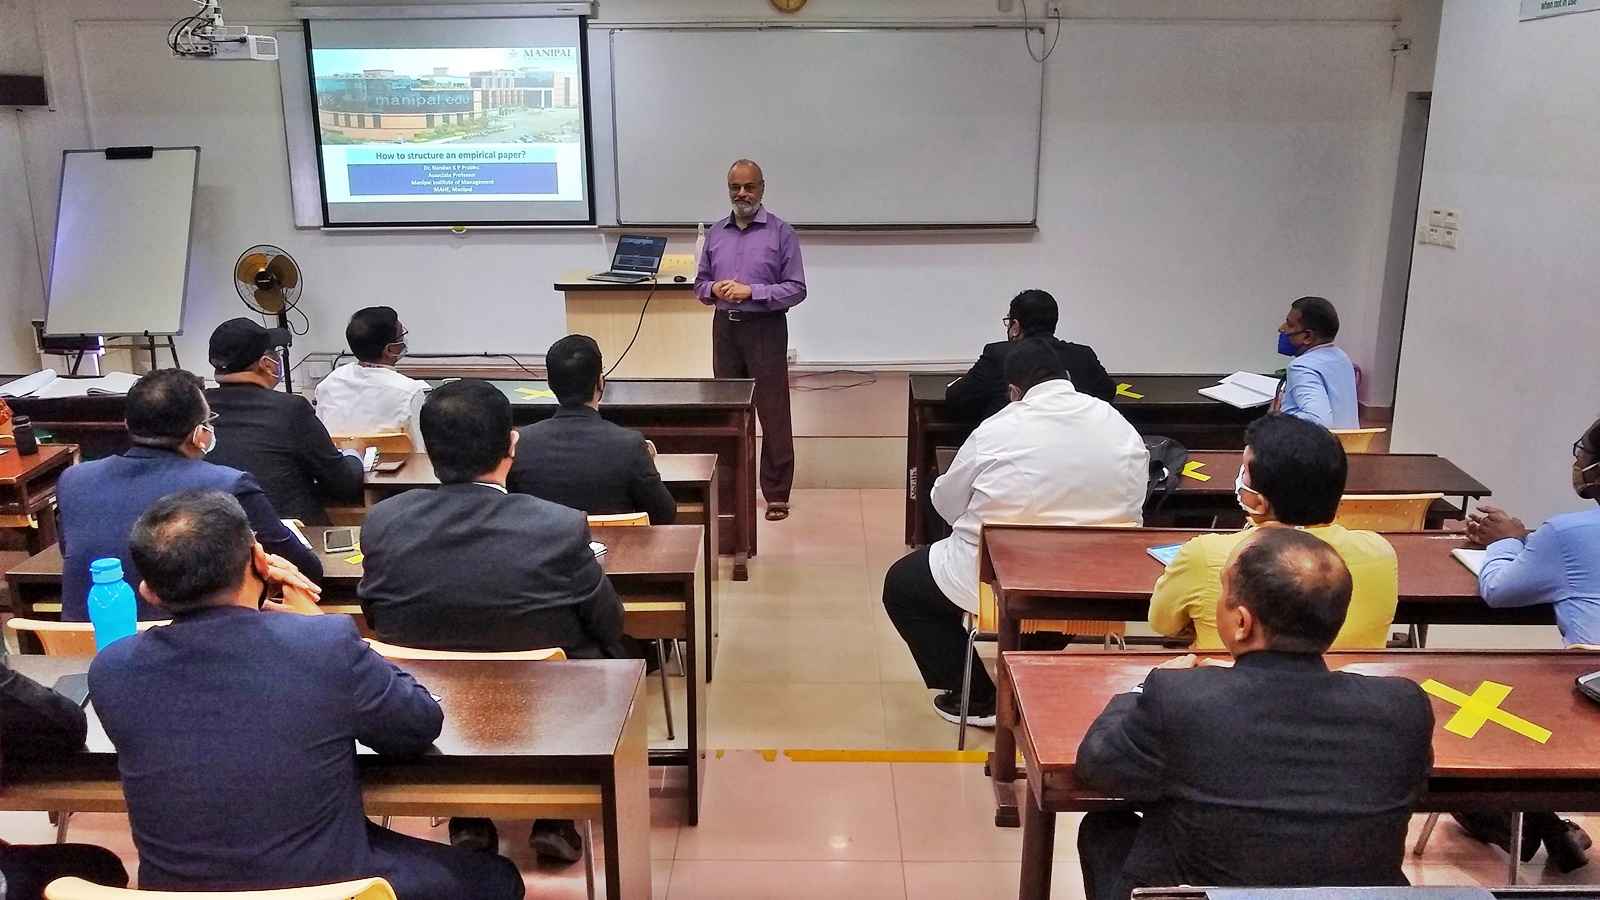 Session on academic writing by Dr. KP Nandan Prabh organized at WGSHA